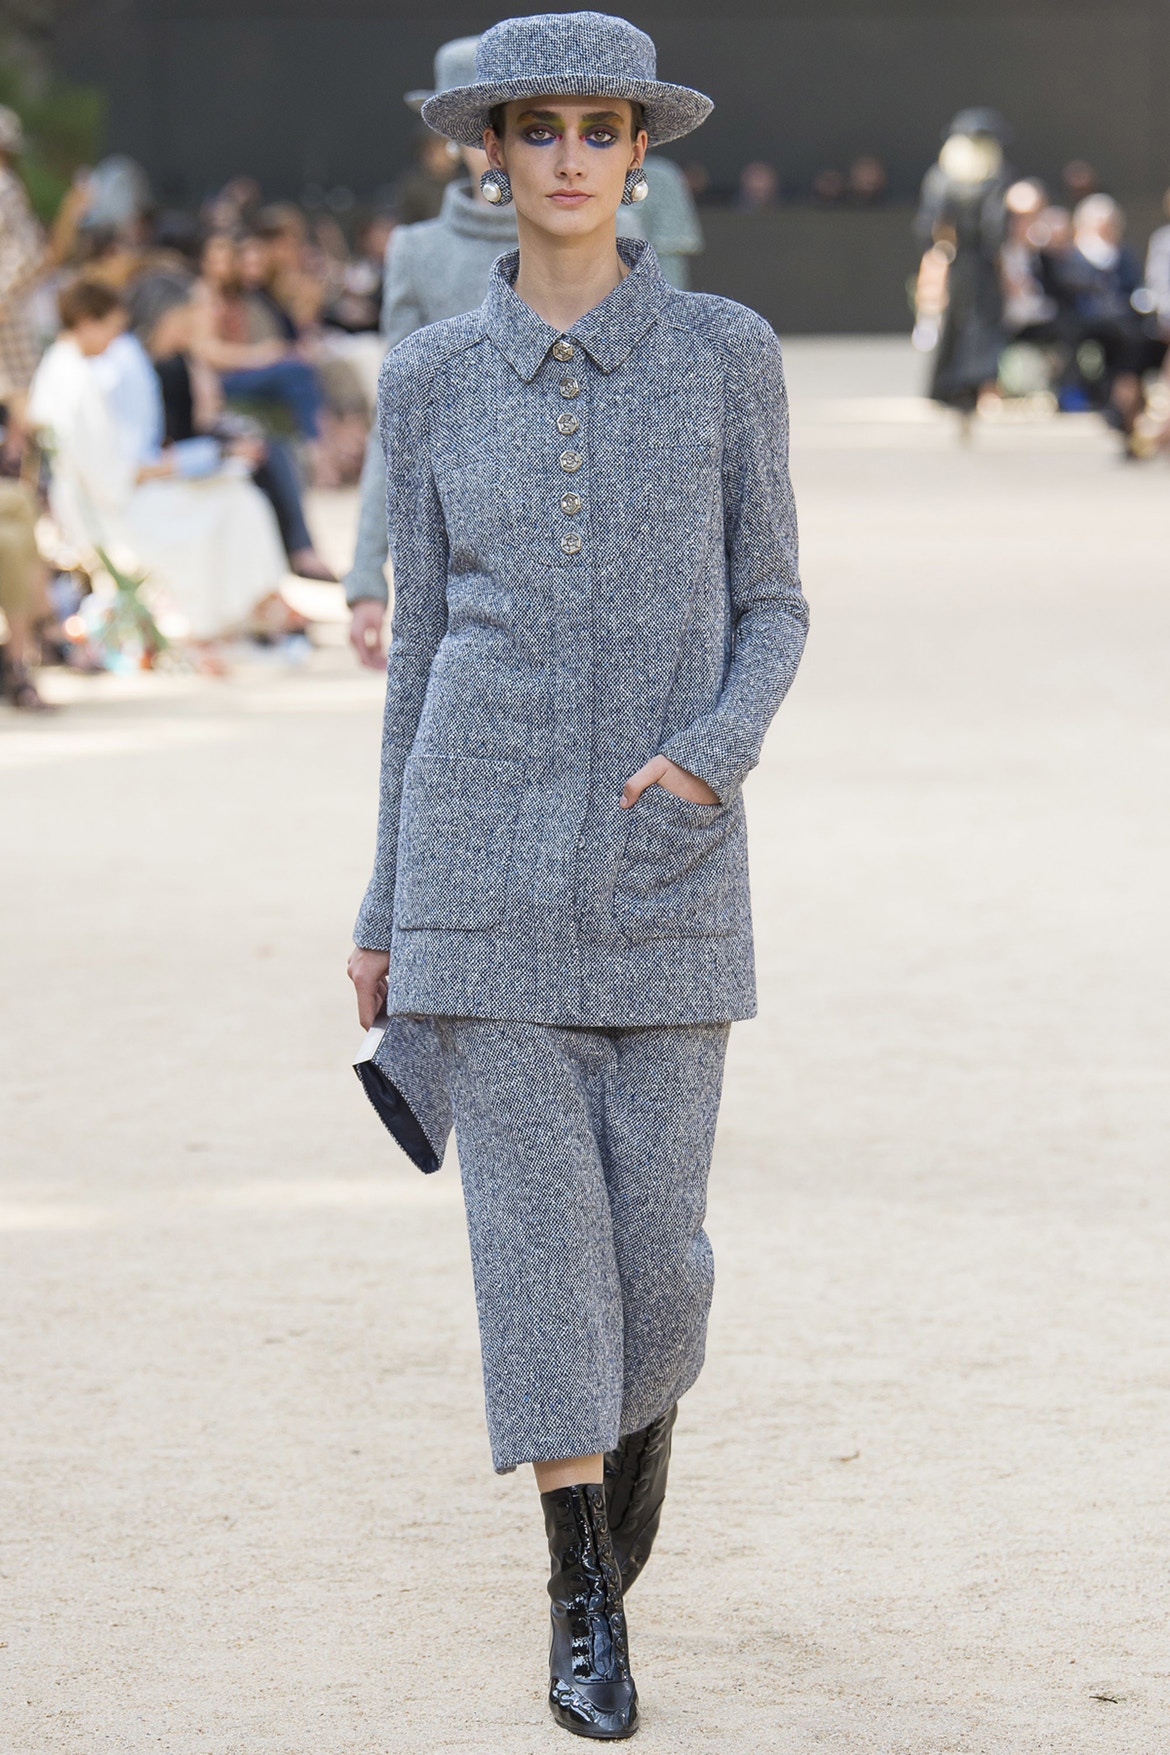 The Chanel Haute Couture Show, Venue, and Clothes Were Amazing!! Thanks ...